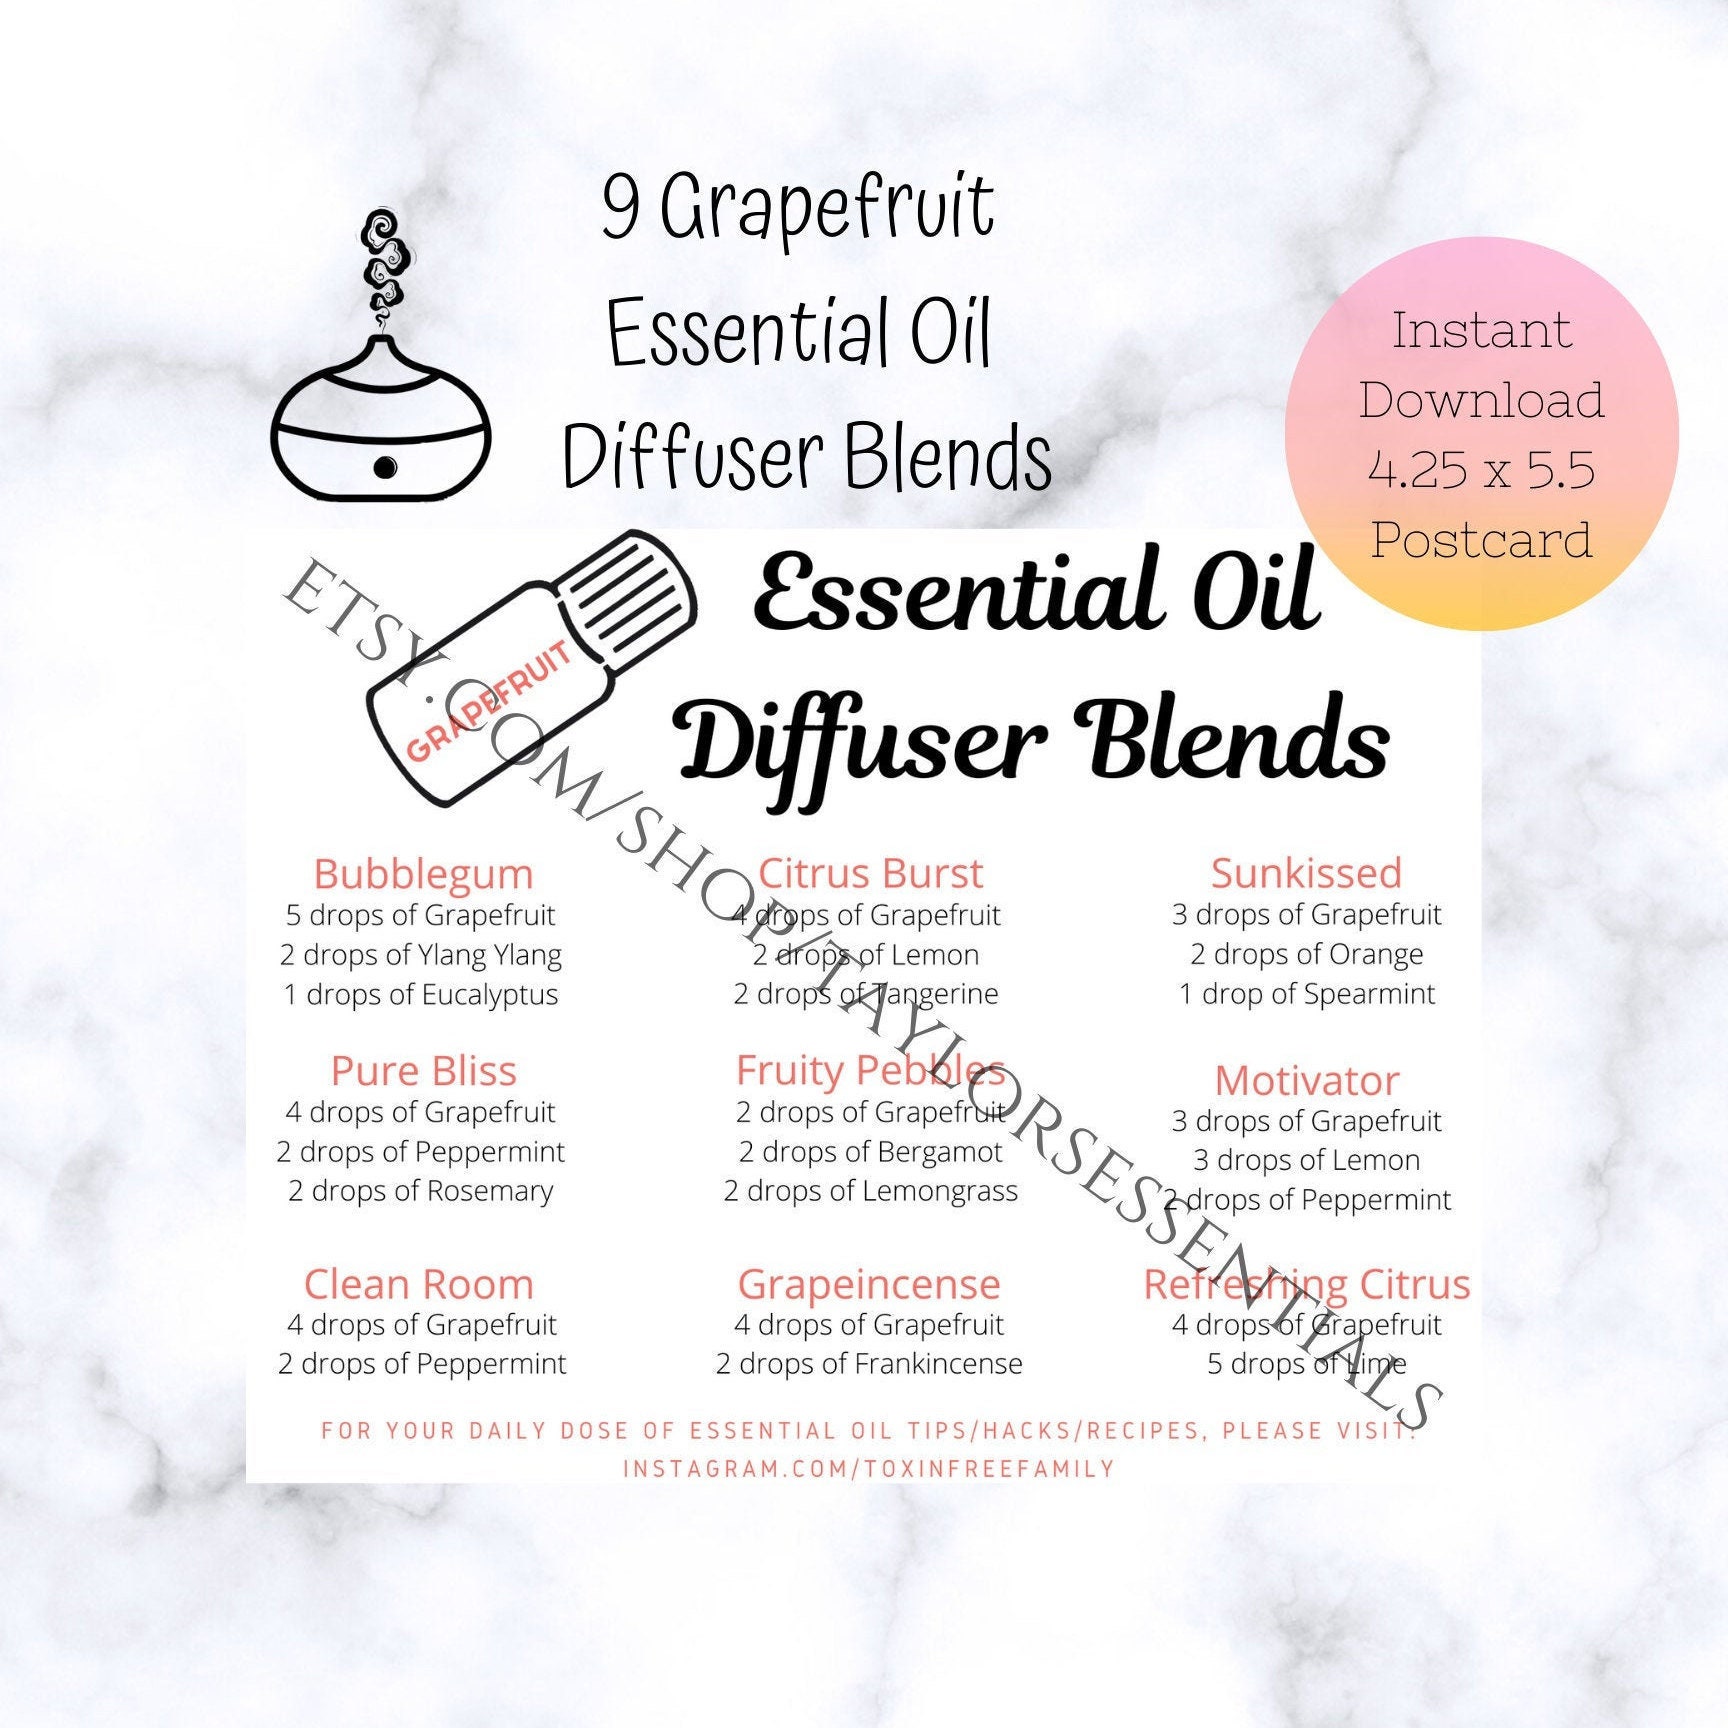 Apple Inspired Diffuser Blends  Essential oil diffuser blends recipes,  Essential oil diffuser recipes, Essential oil mixes